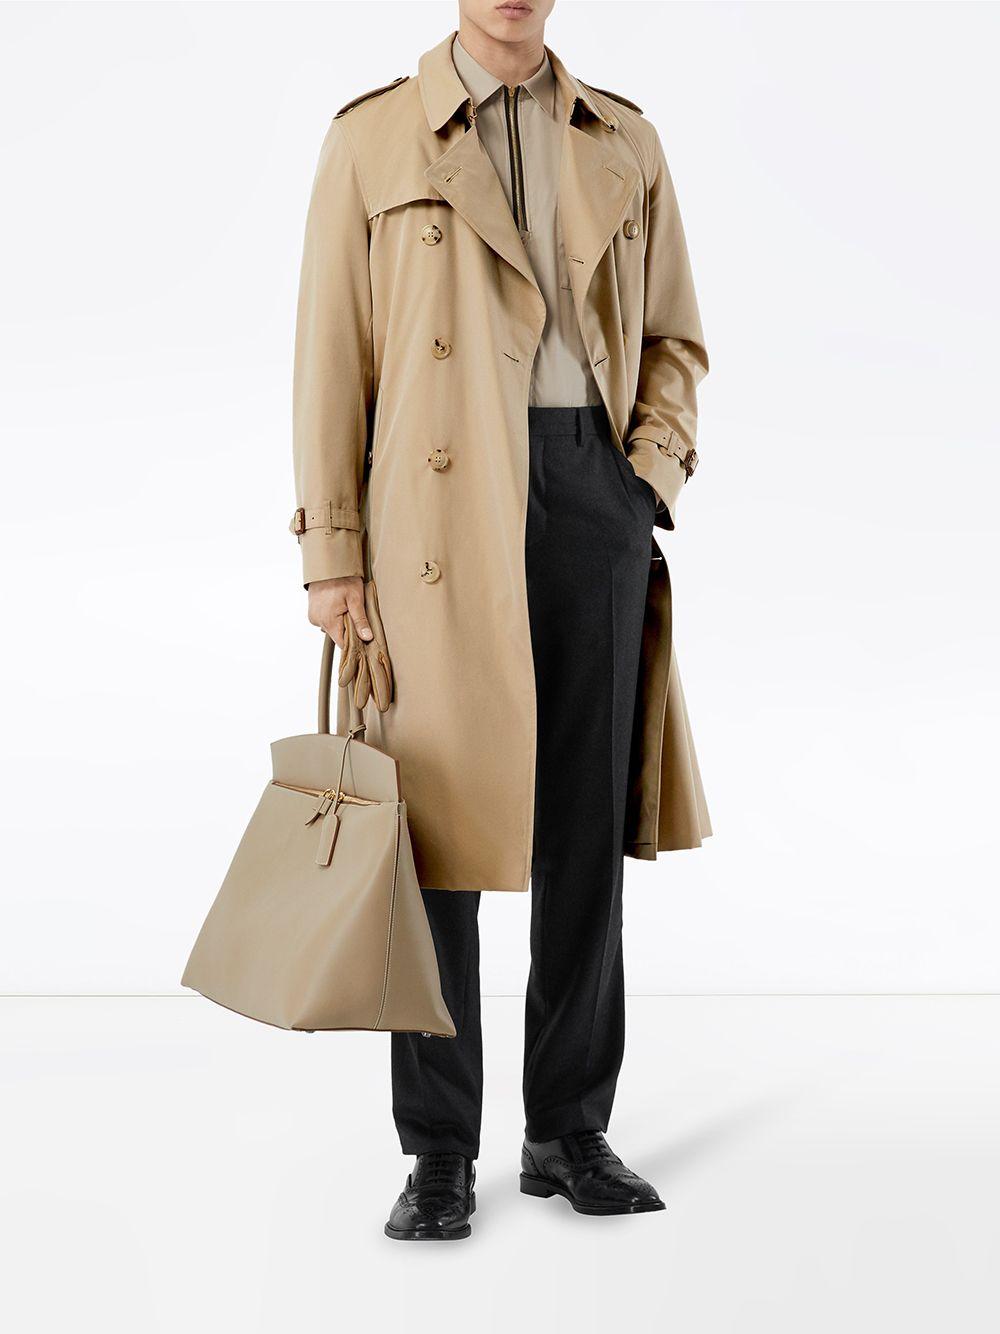 Burberry Chelsea Heritage Long Trench Coat in Natural for Men - Lyst